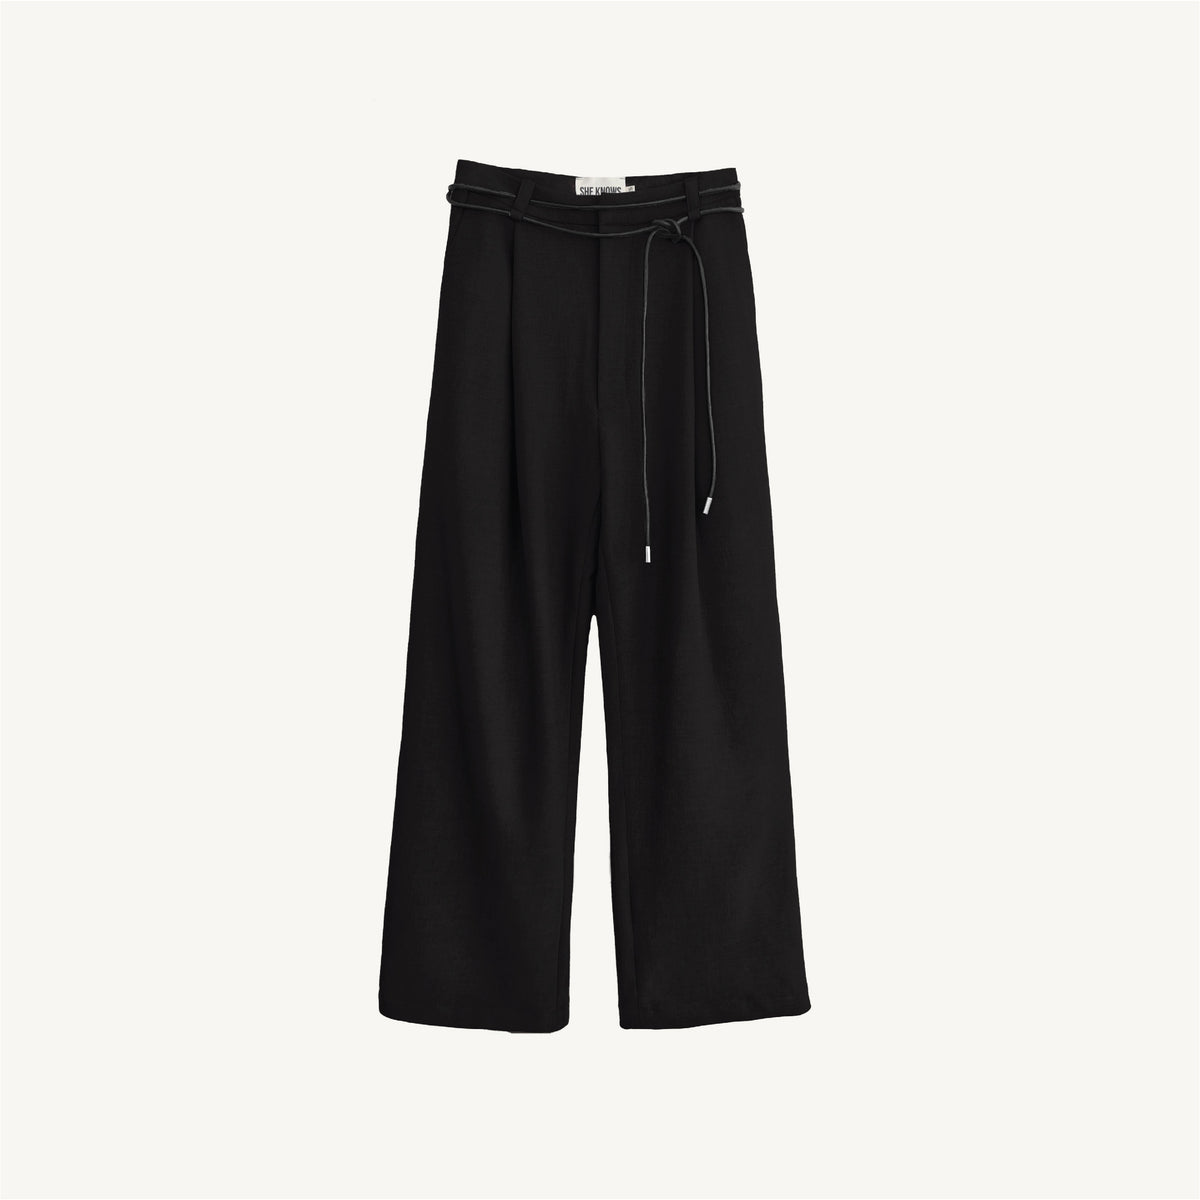 SHE KNOWS - Metier Trousers